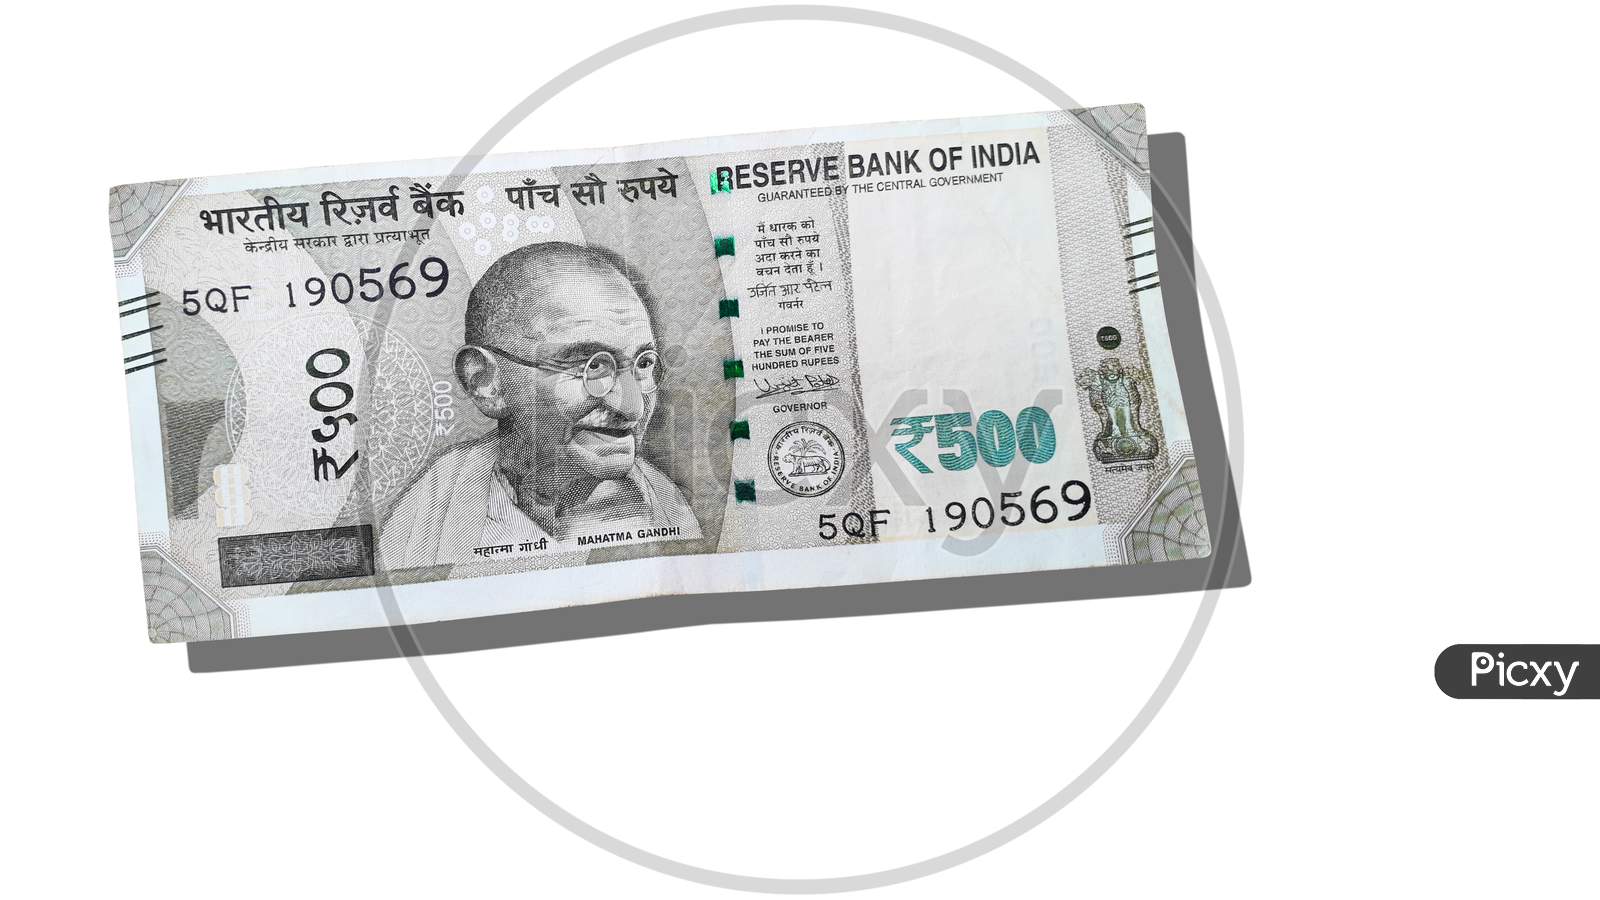 Indian currency note of 500 rupees, with the photo printed of Mahatma Gandhi on it -isolated image. The Reserve Bank of India Indian (RBI) launches the currency notes.